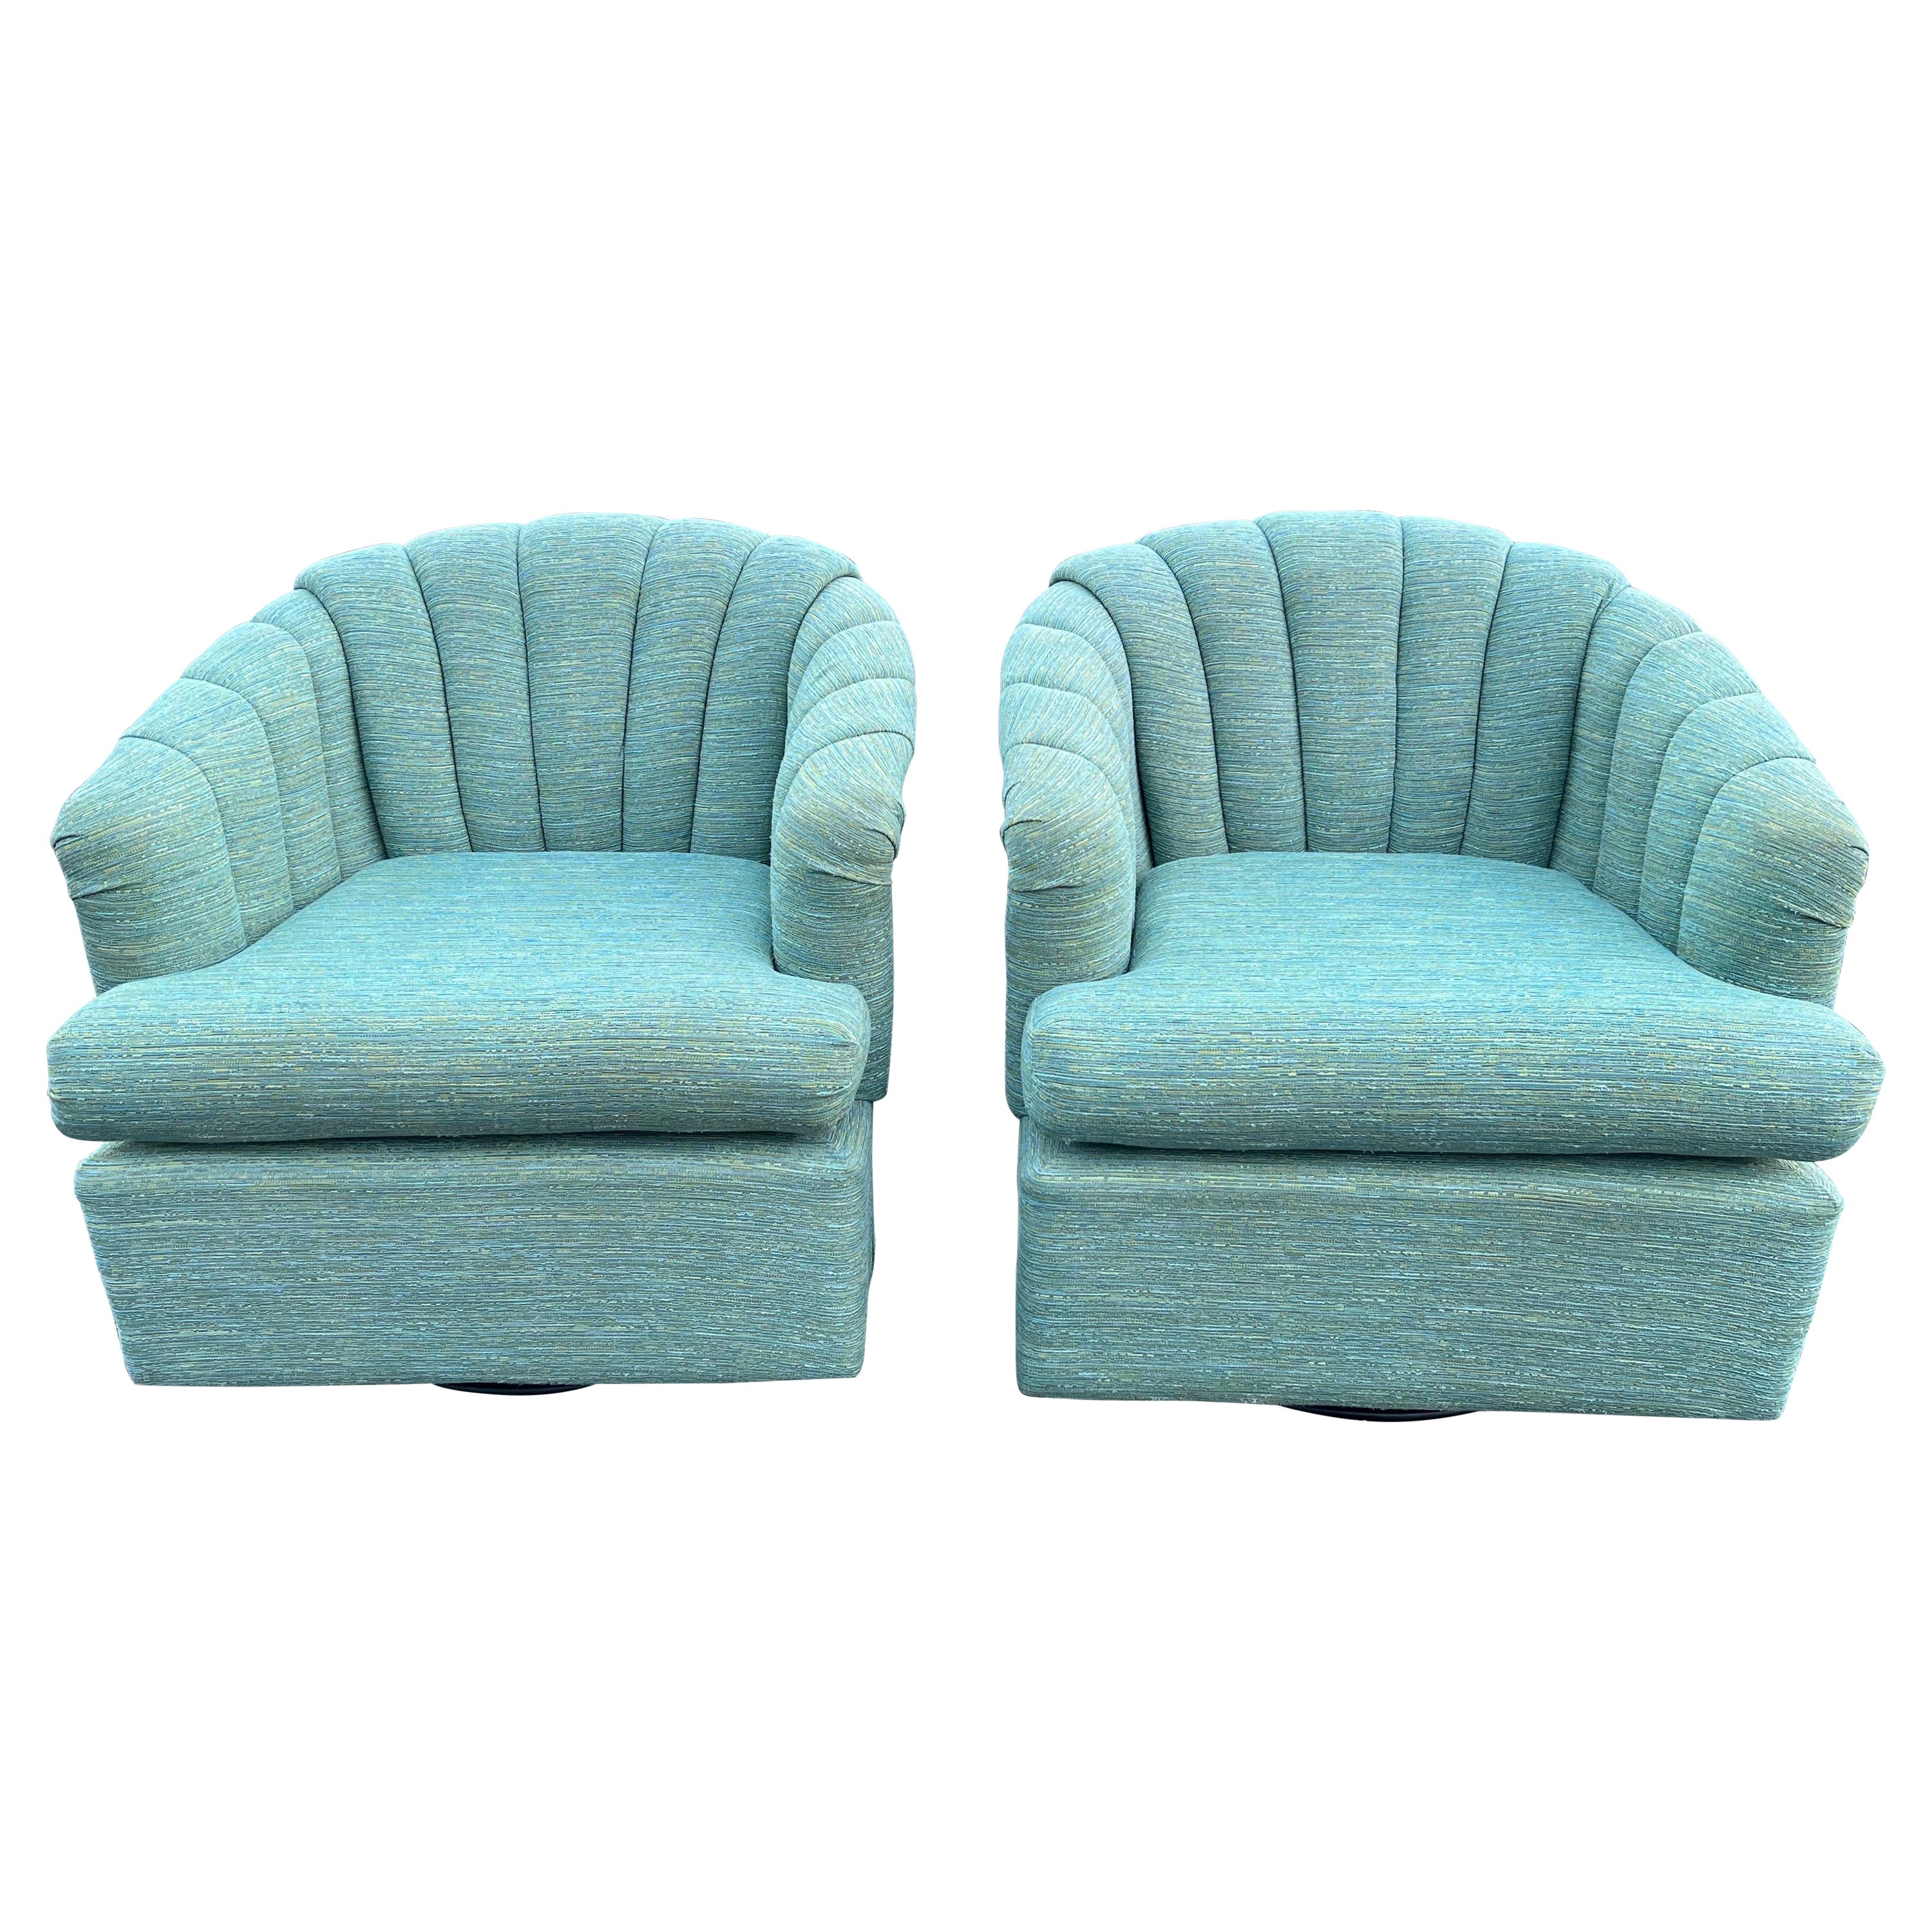 Pair of Turquoise Channel Back Swivel Chairs 